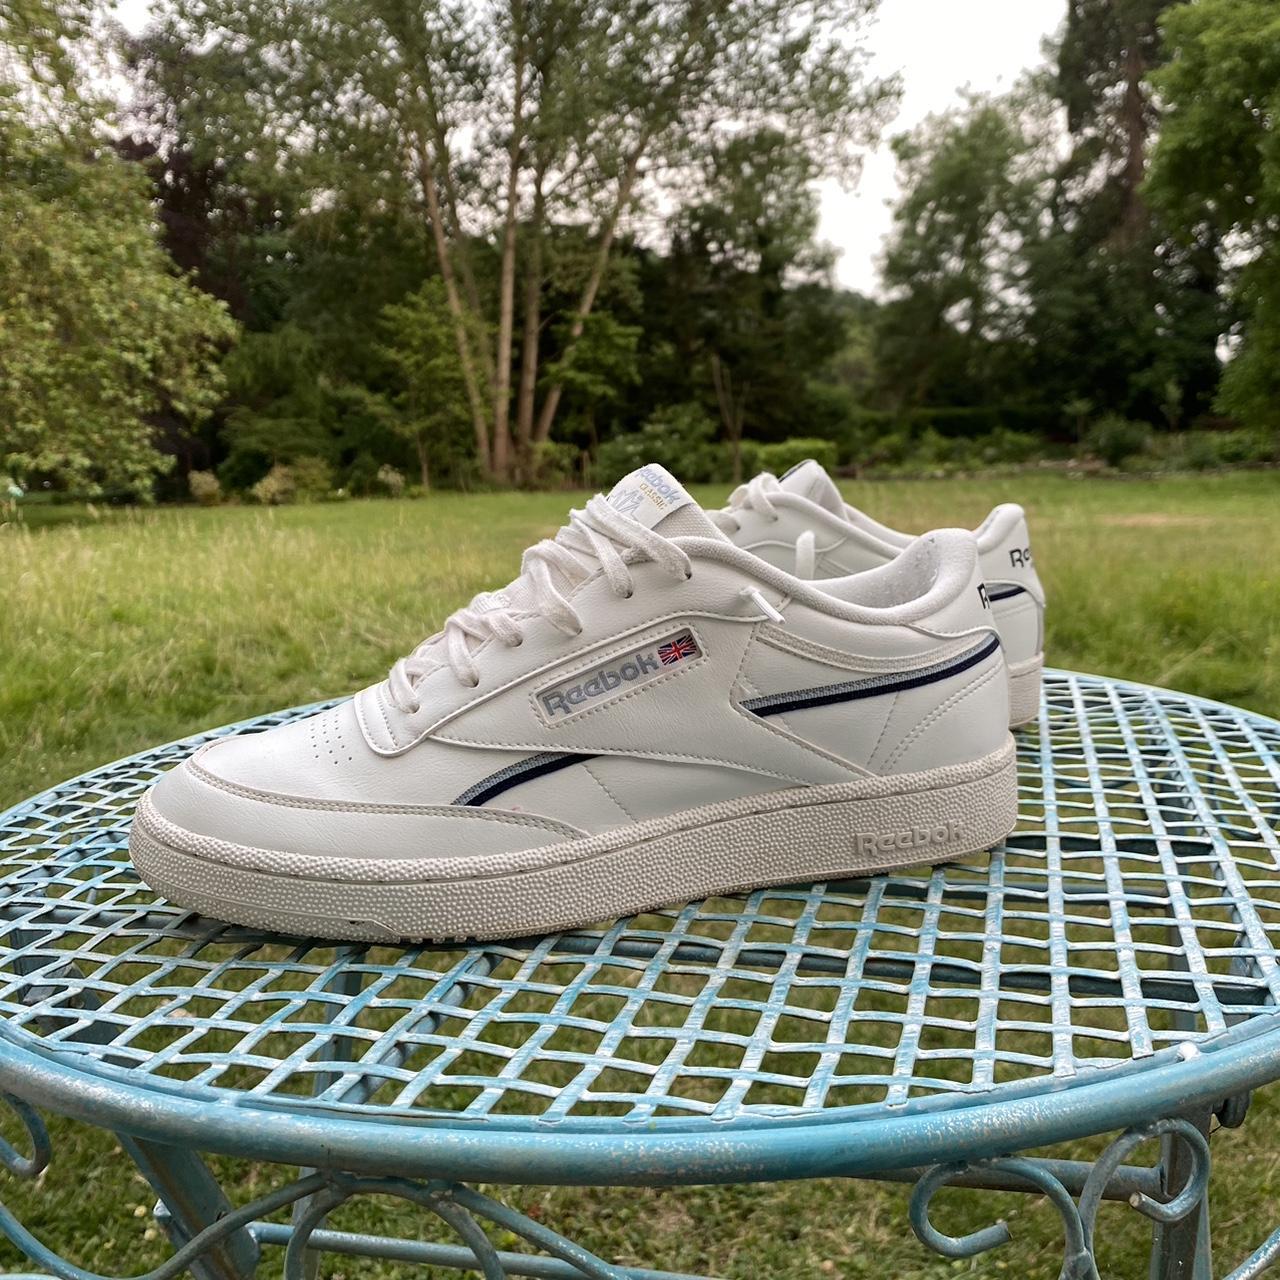 Reebok Men's White and Blue Trainers | Depop